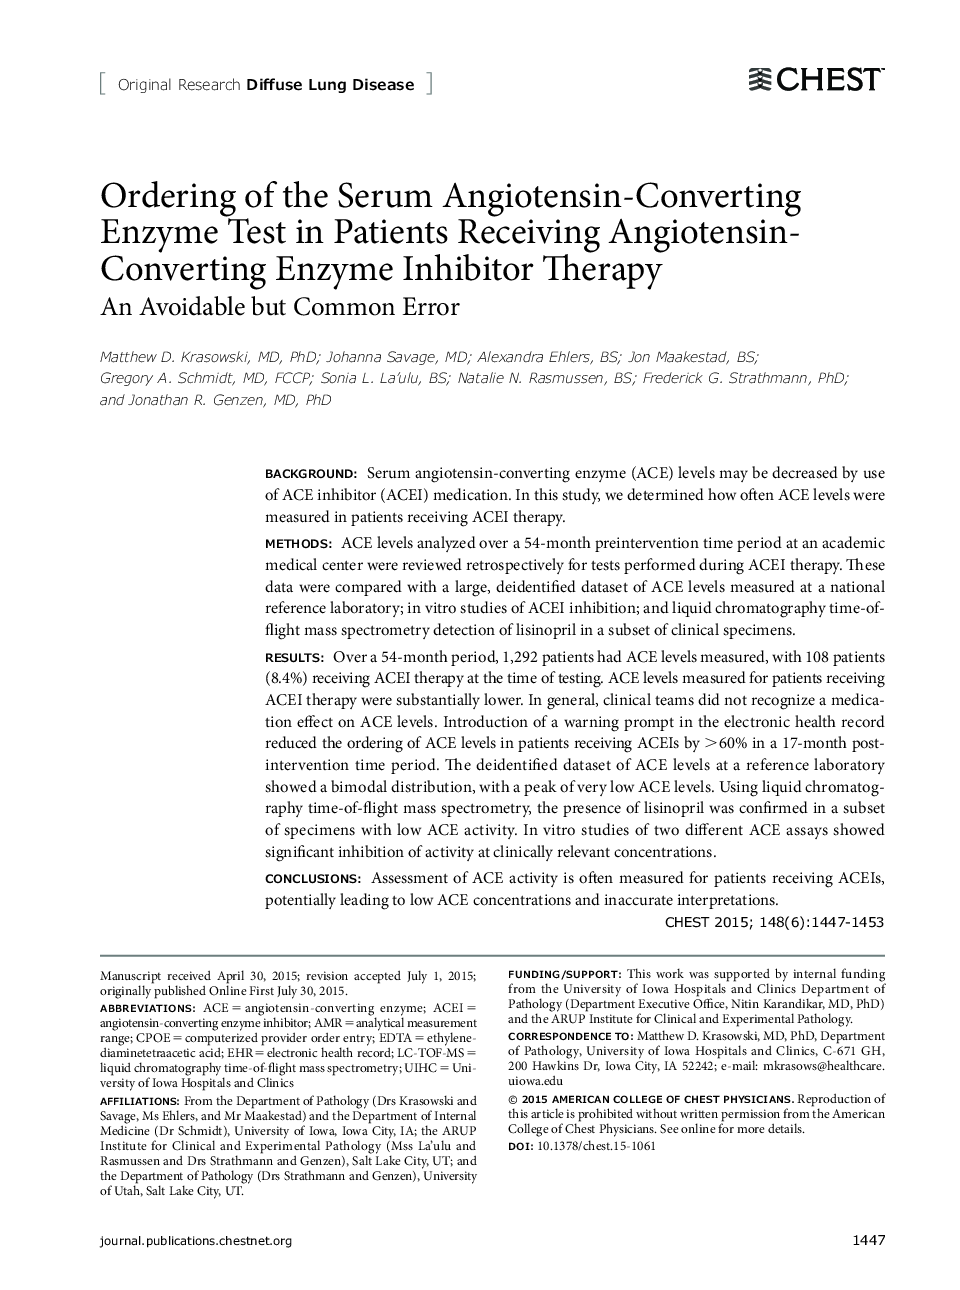 Ordering of the Serum Angiotensin-Converting Enzyme Test in Patients Receiving Angiotensin-Converting Enzyme Inhibitor Therapy